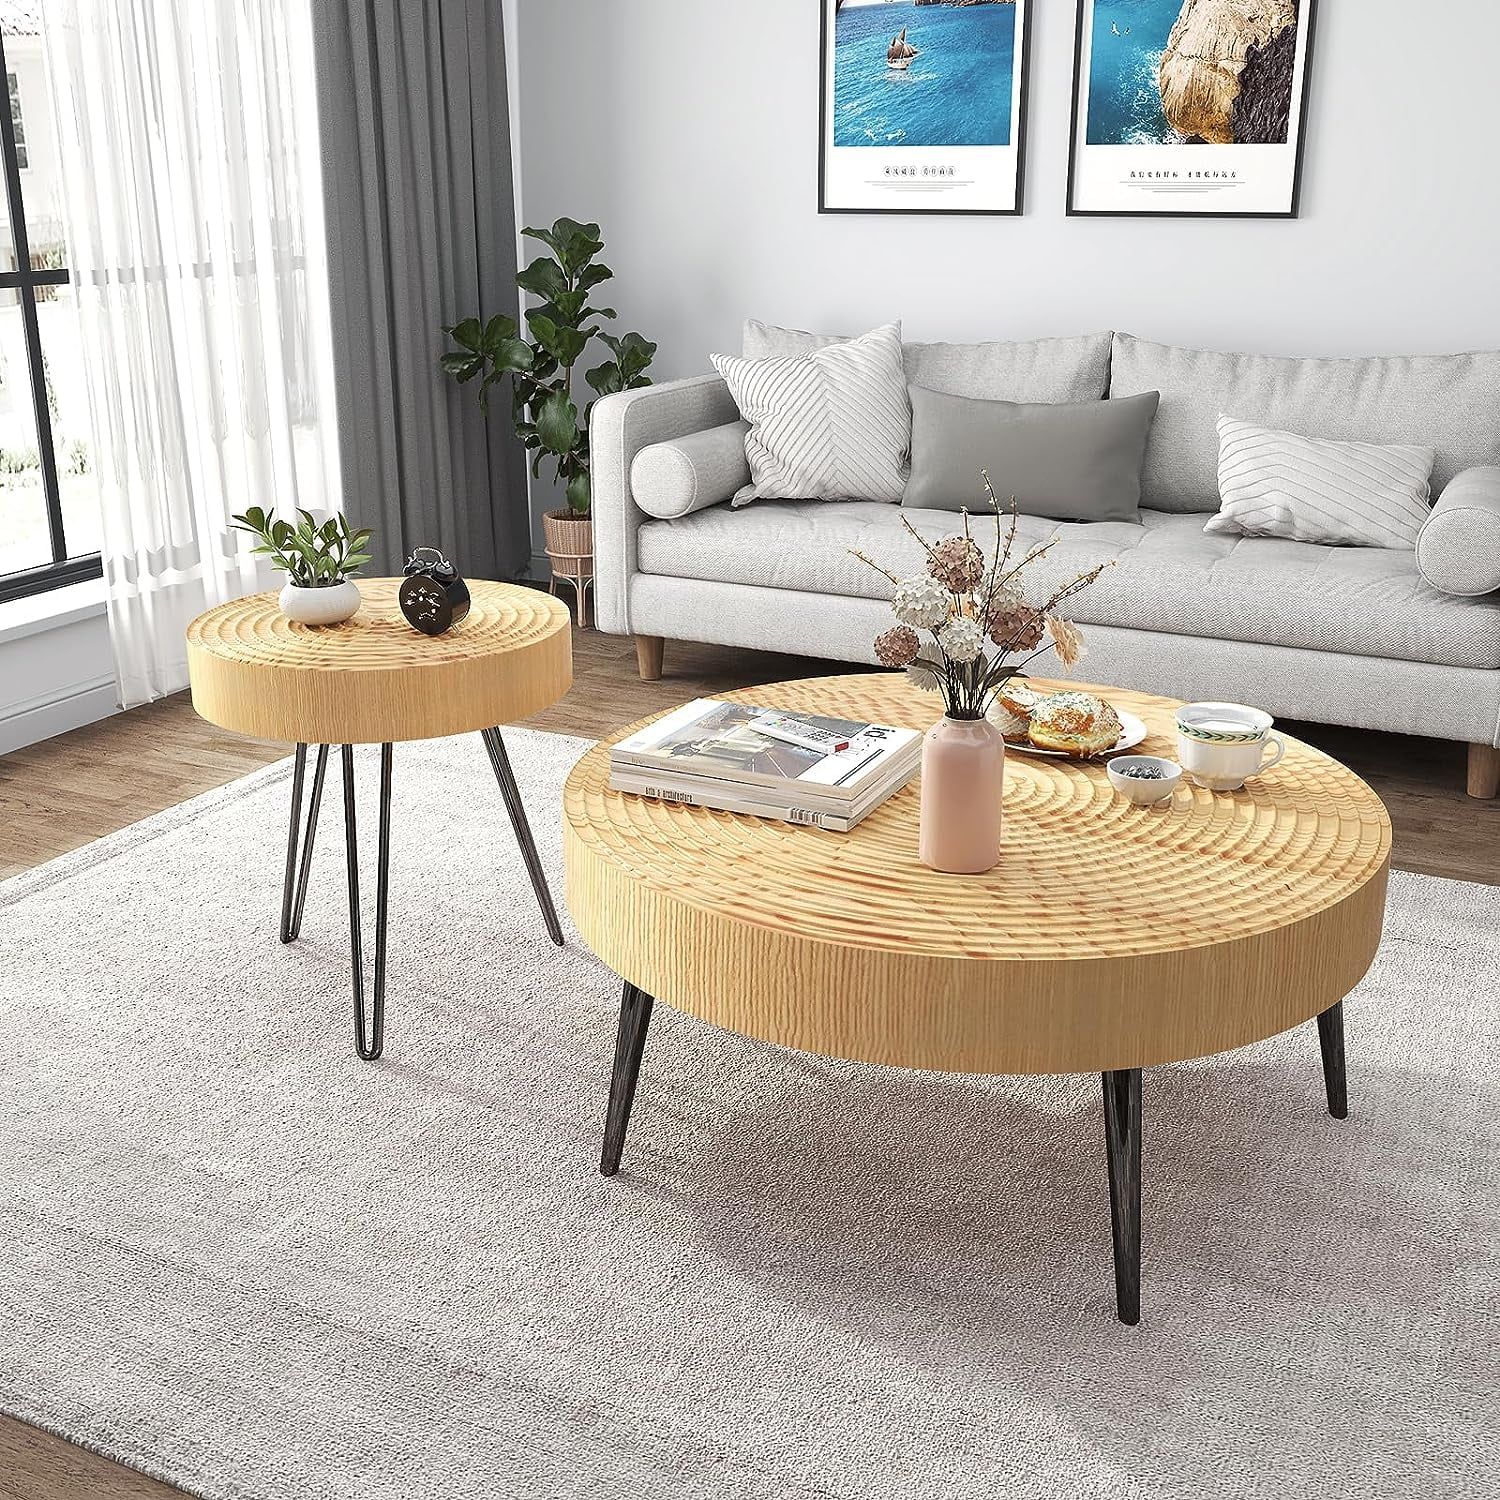 Chvans 2 Pieces Round Coffee Table Set, Modern Farmhouse Living Room Coffee  Table Set, Wood Round Nesting Table With Ring Motif – Walmart Regarding Modern Farmhouse Coffee Table Sets (View 3 of 15)